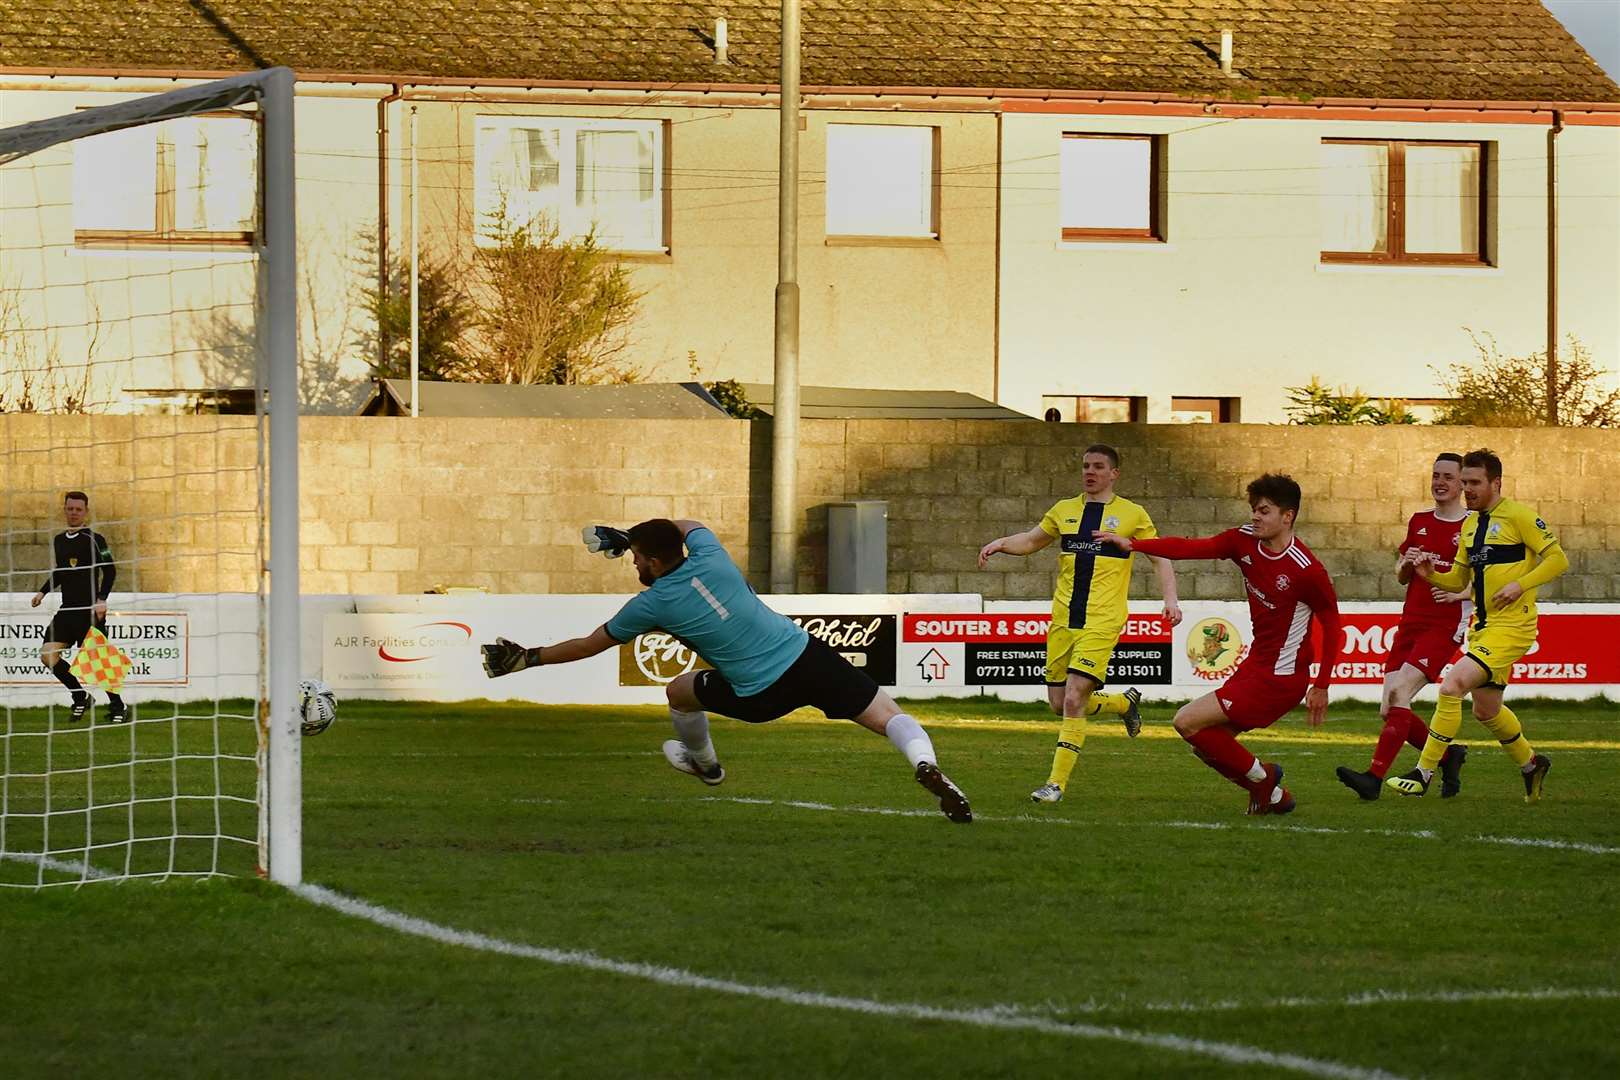 Craig Gunn fires the ball past Lossiemouth goalkeeper Stewart Black to open scoring for the Scorries. Picture: Mel Roger